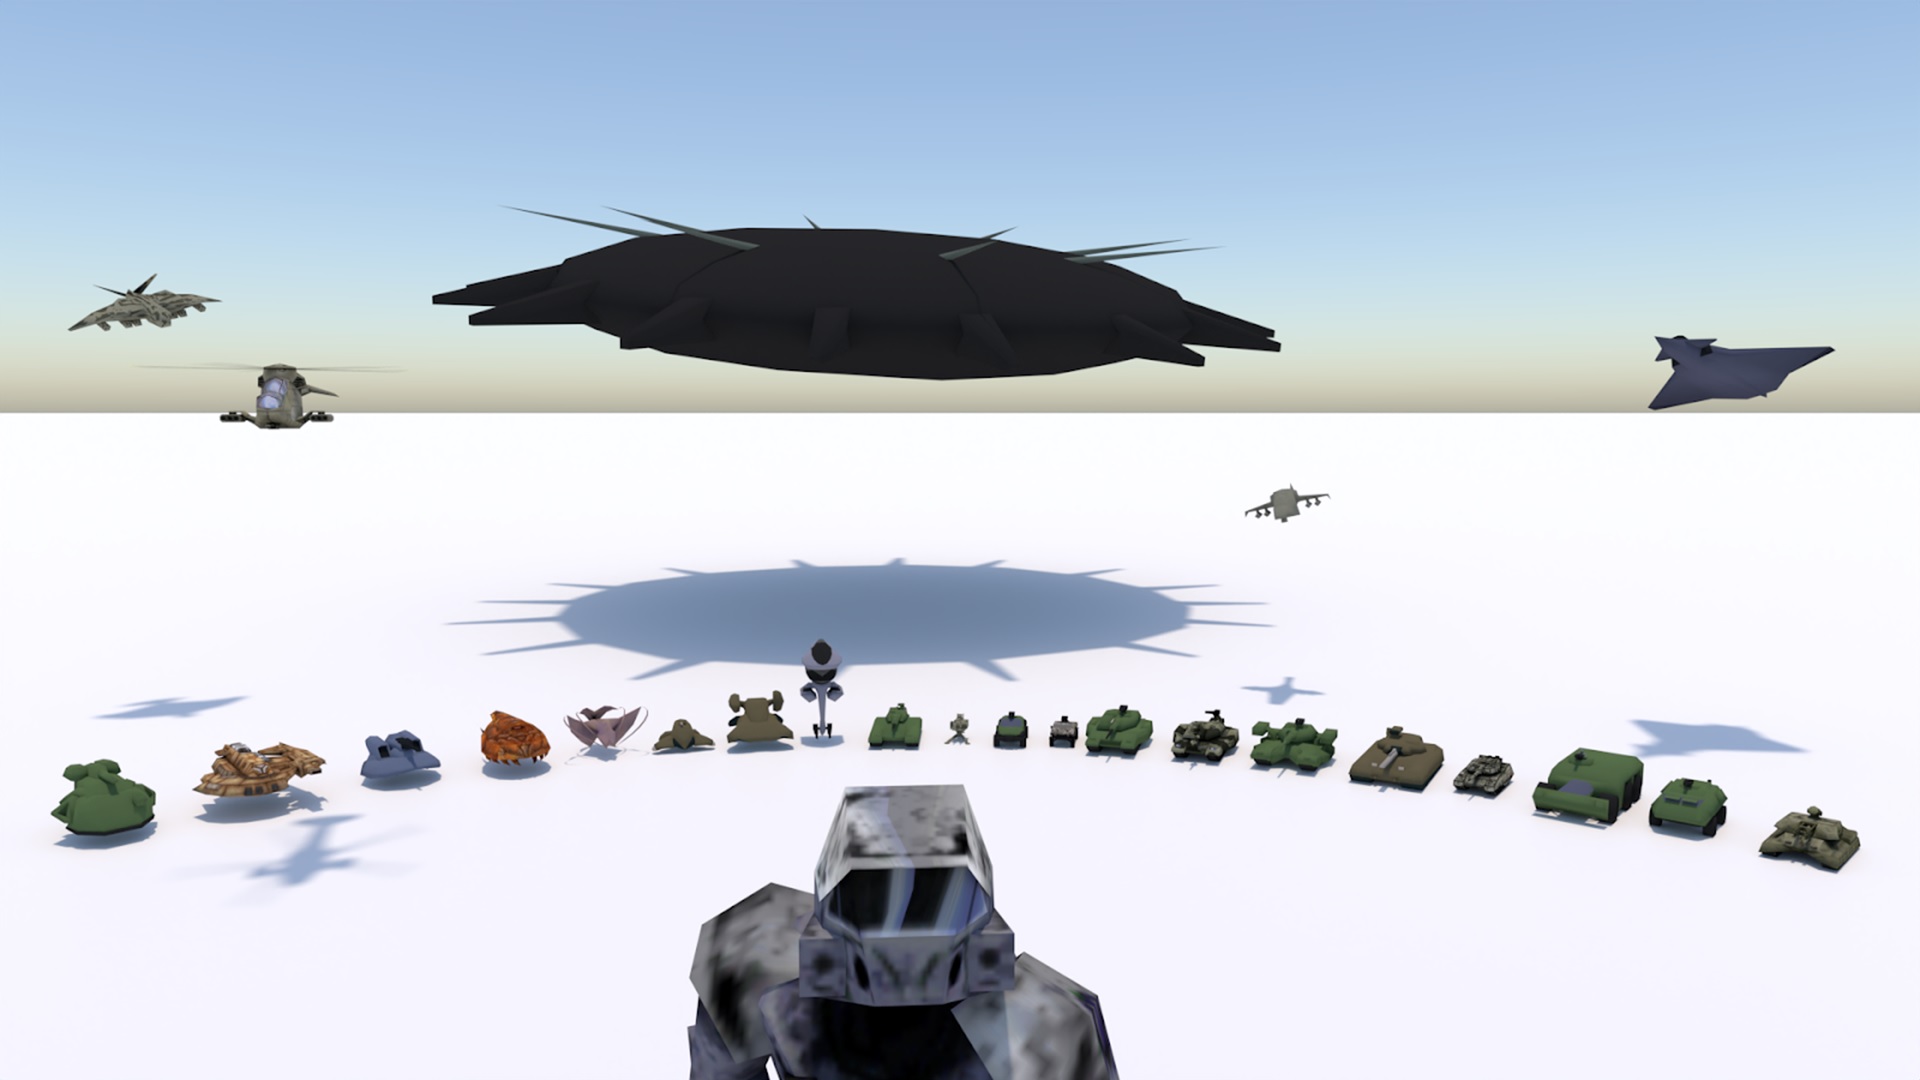 Images of some salvaged vehicles from Halo's RTS days. It's low poly and very cute.